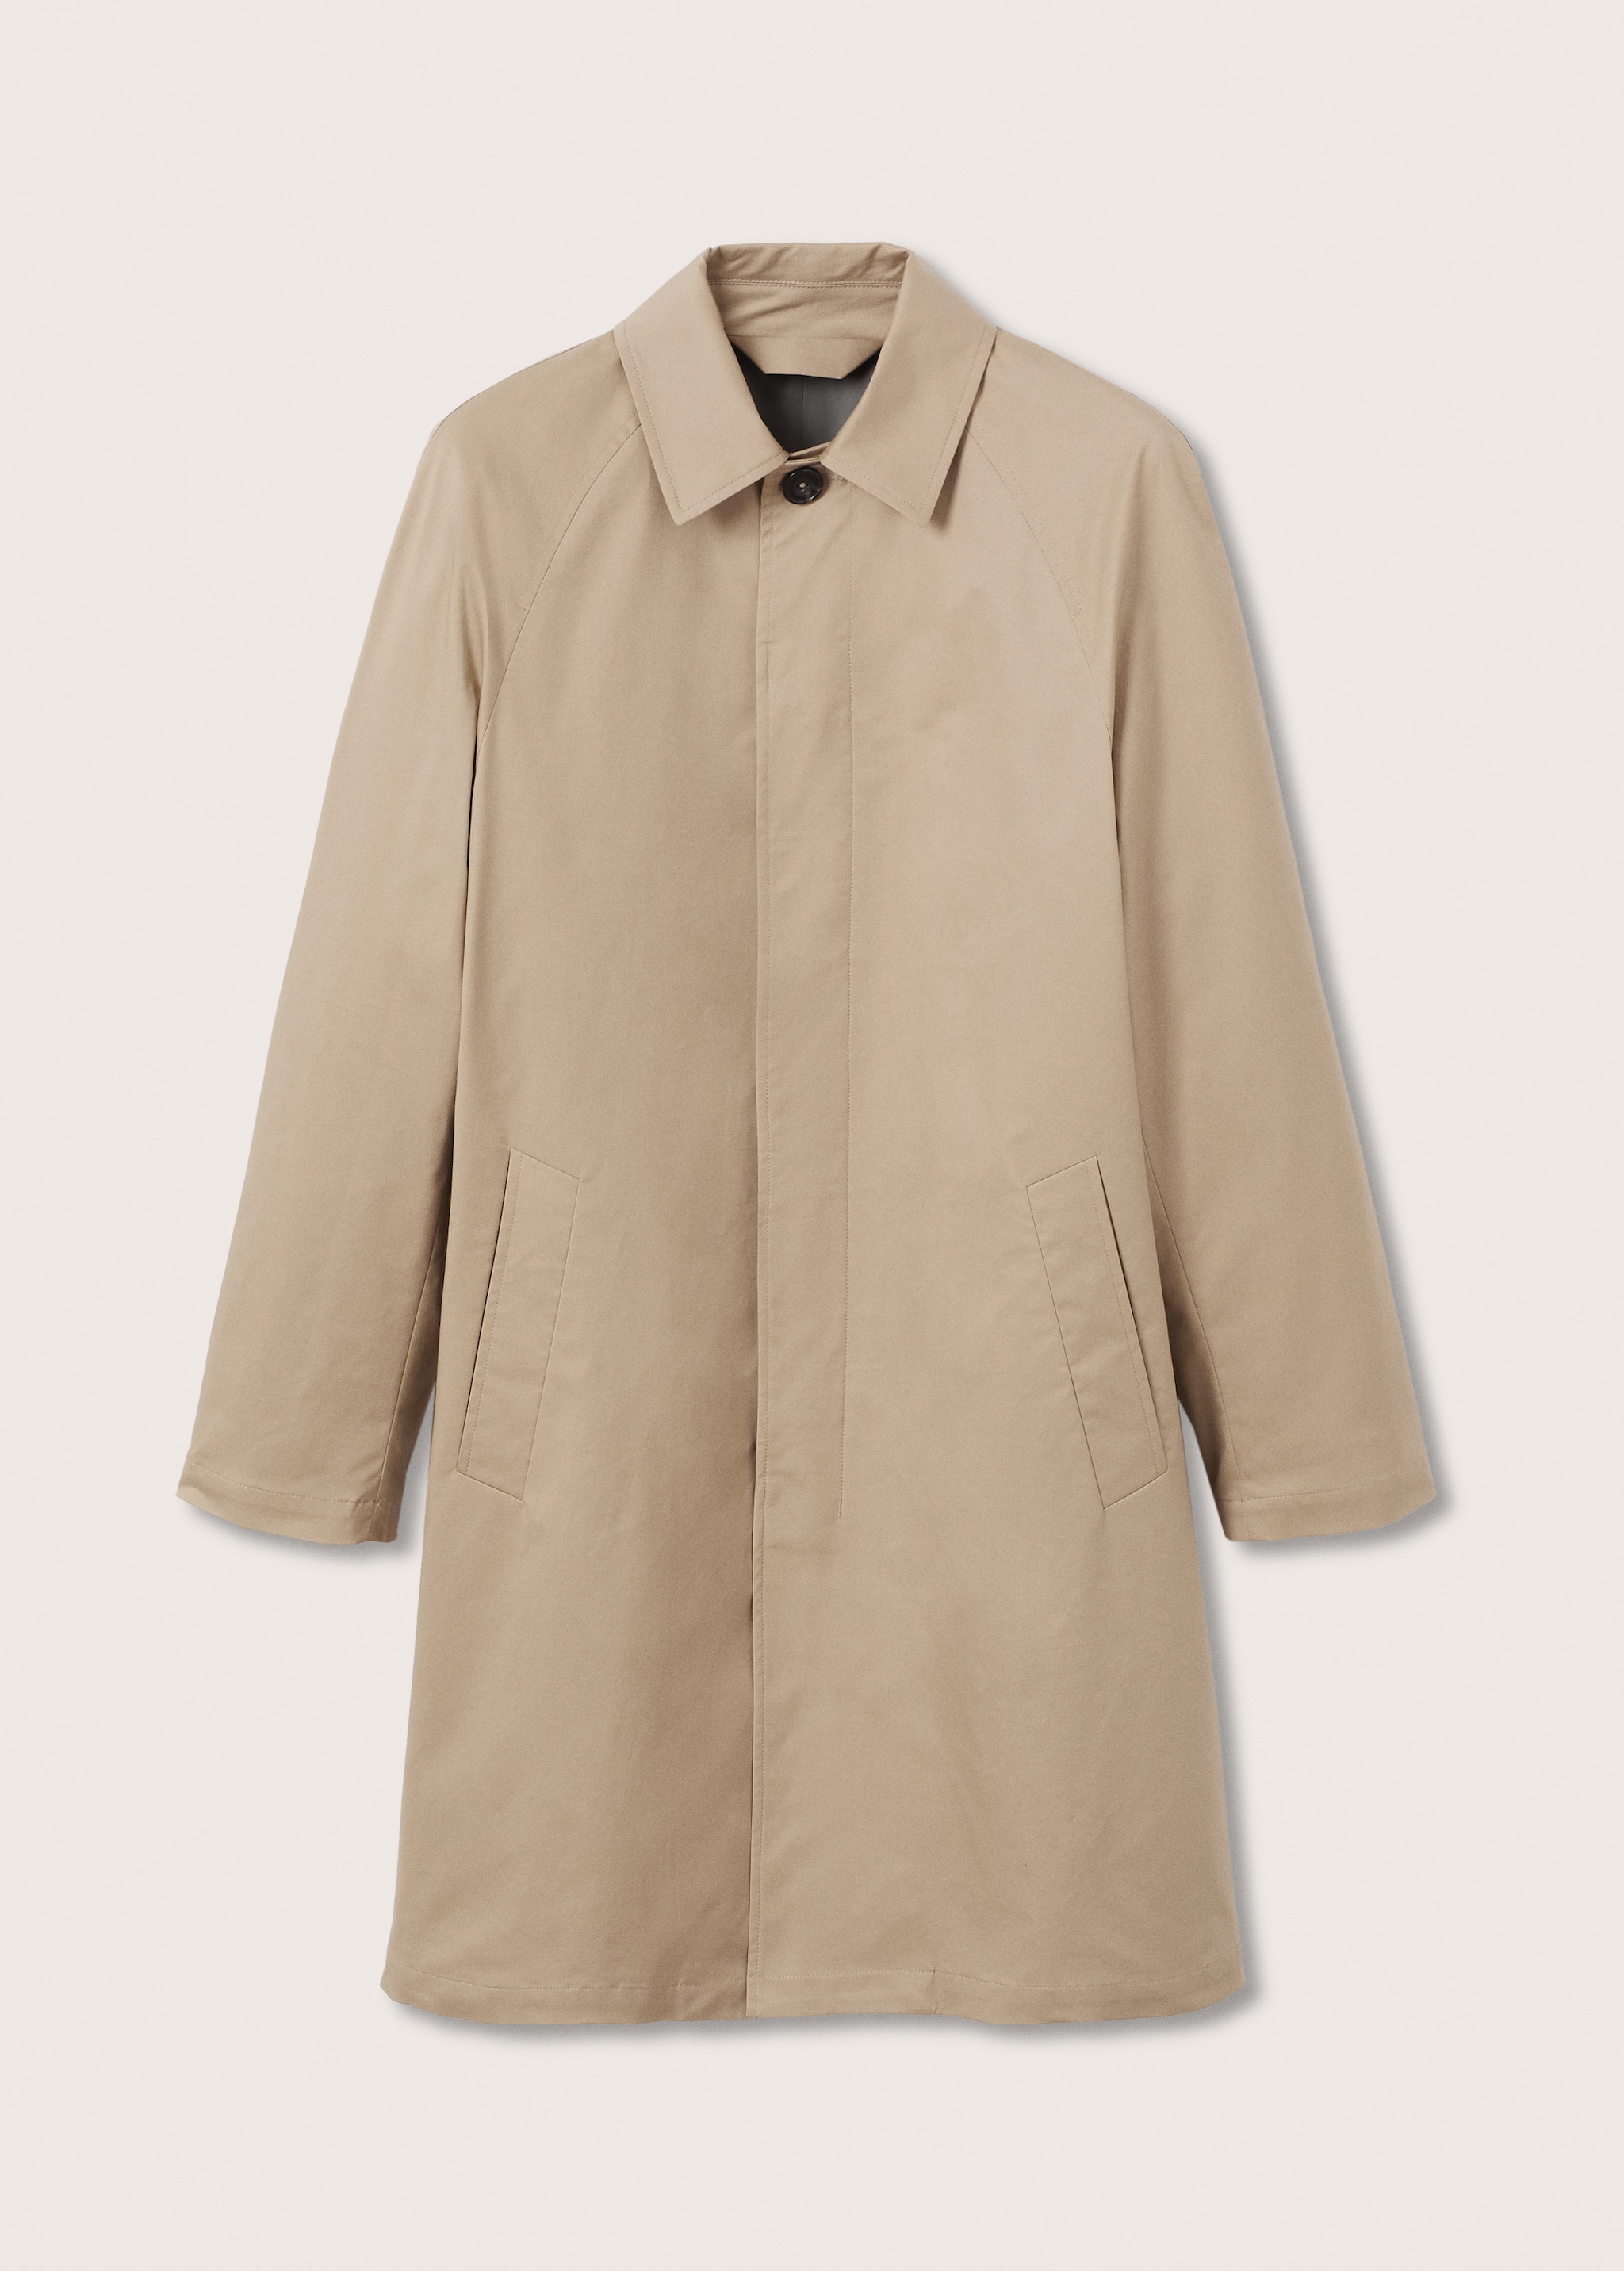 Lightweight cotton trench - Article without model